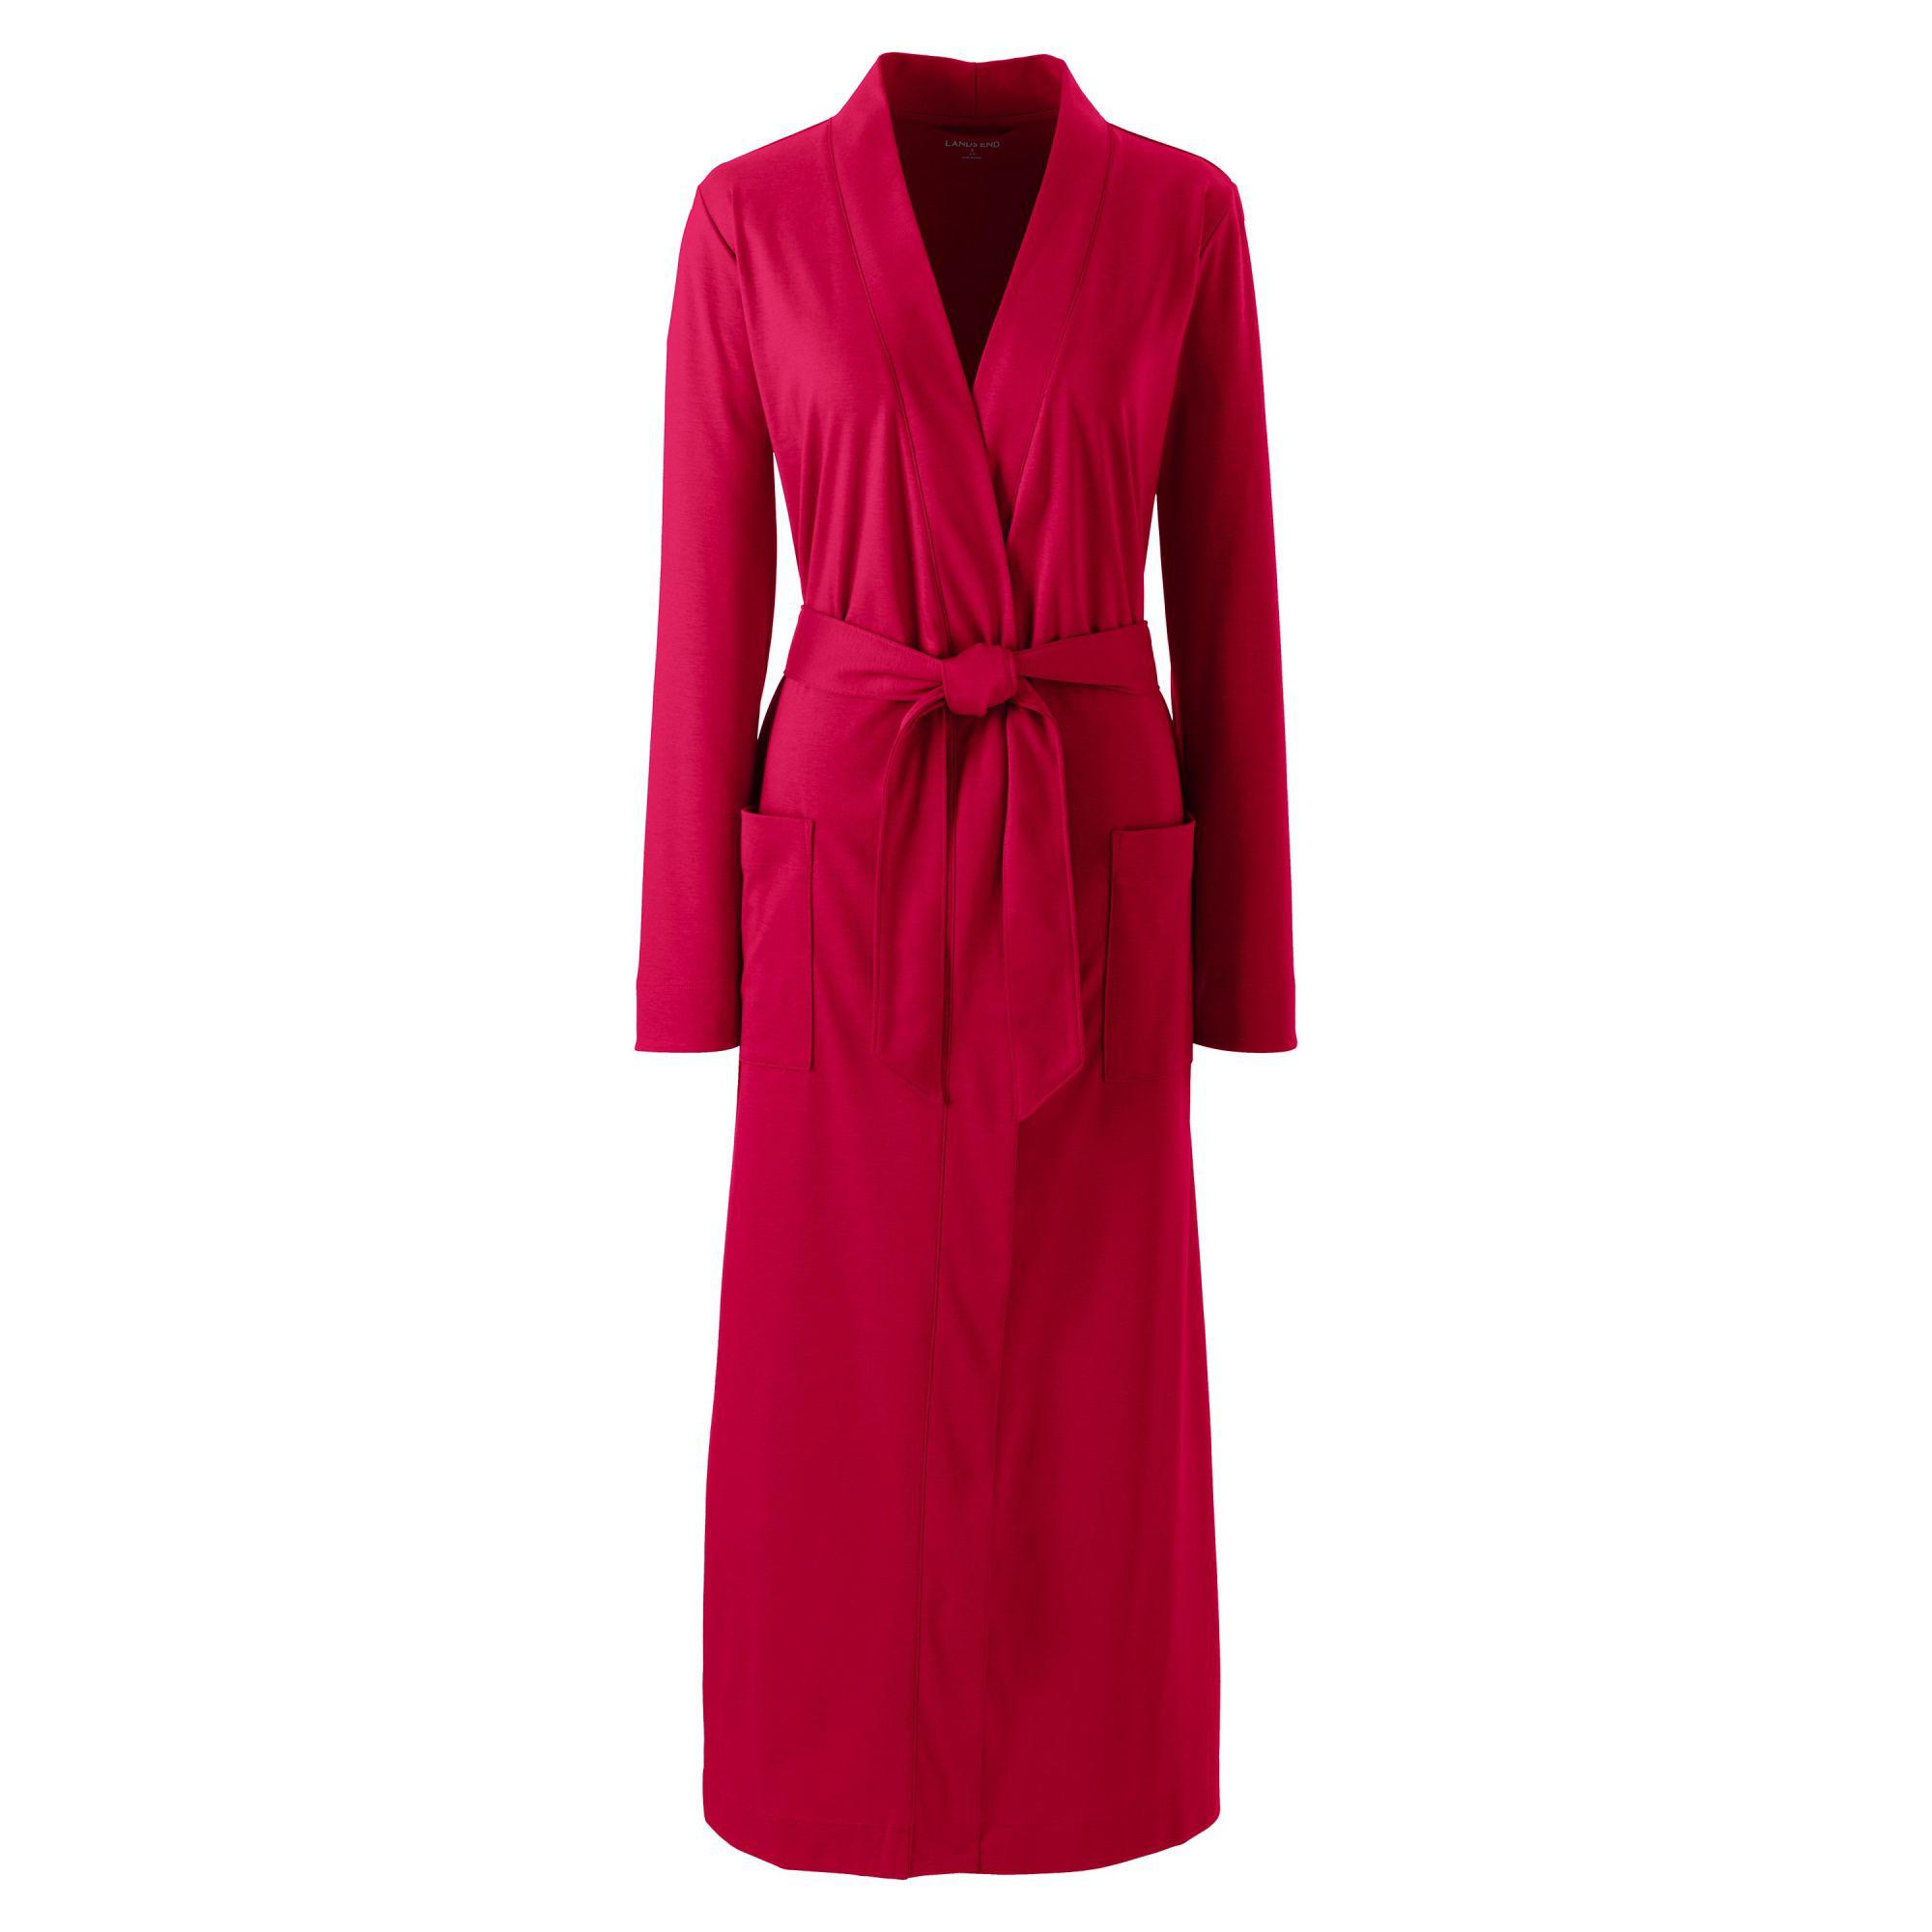 Lands' End Red Supima Dressing Gown - Lyst